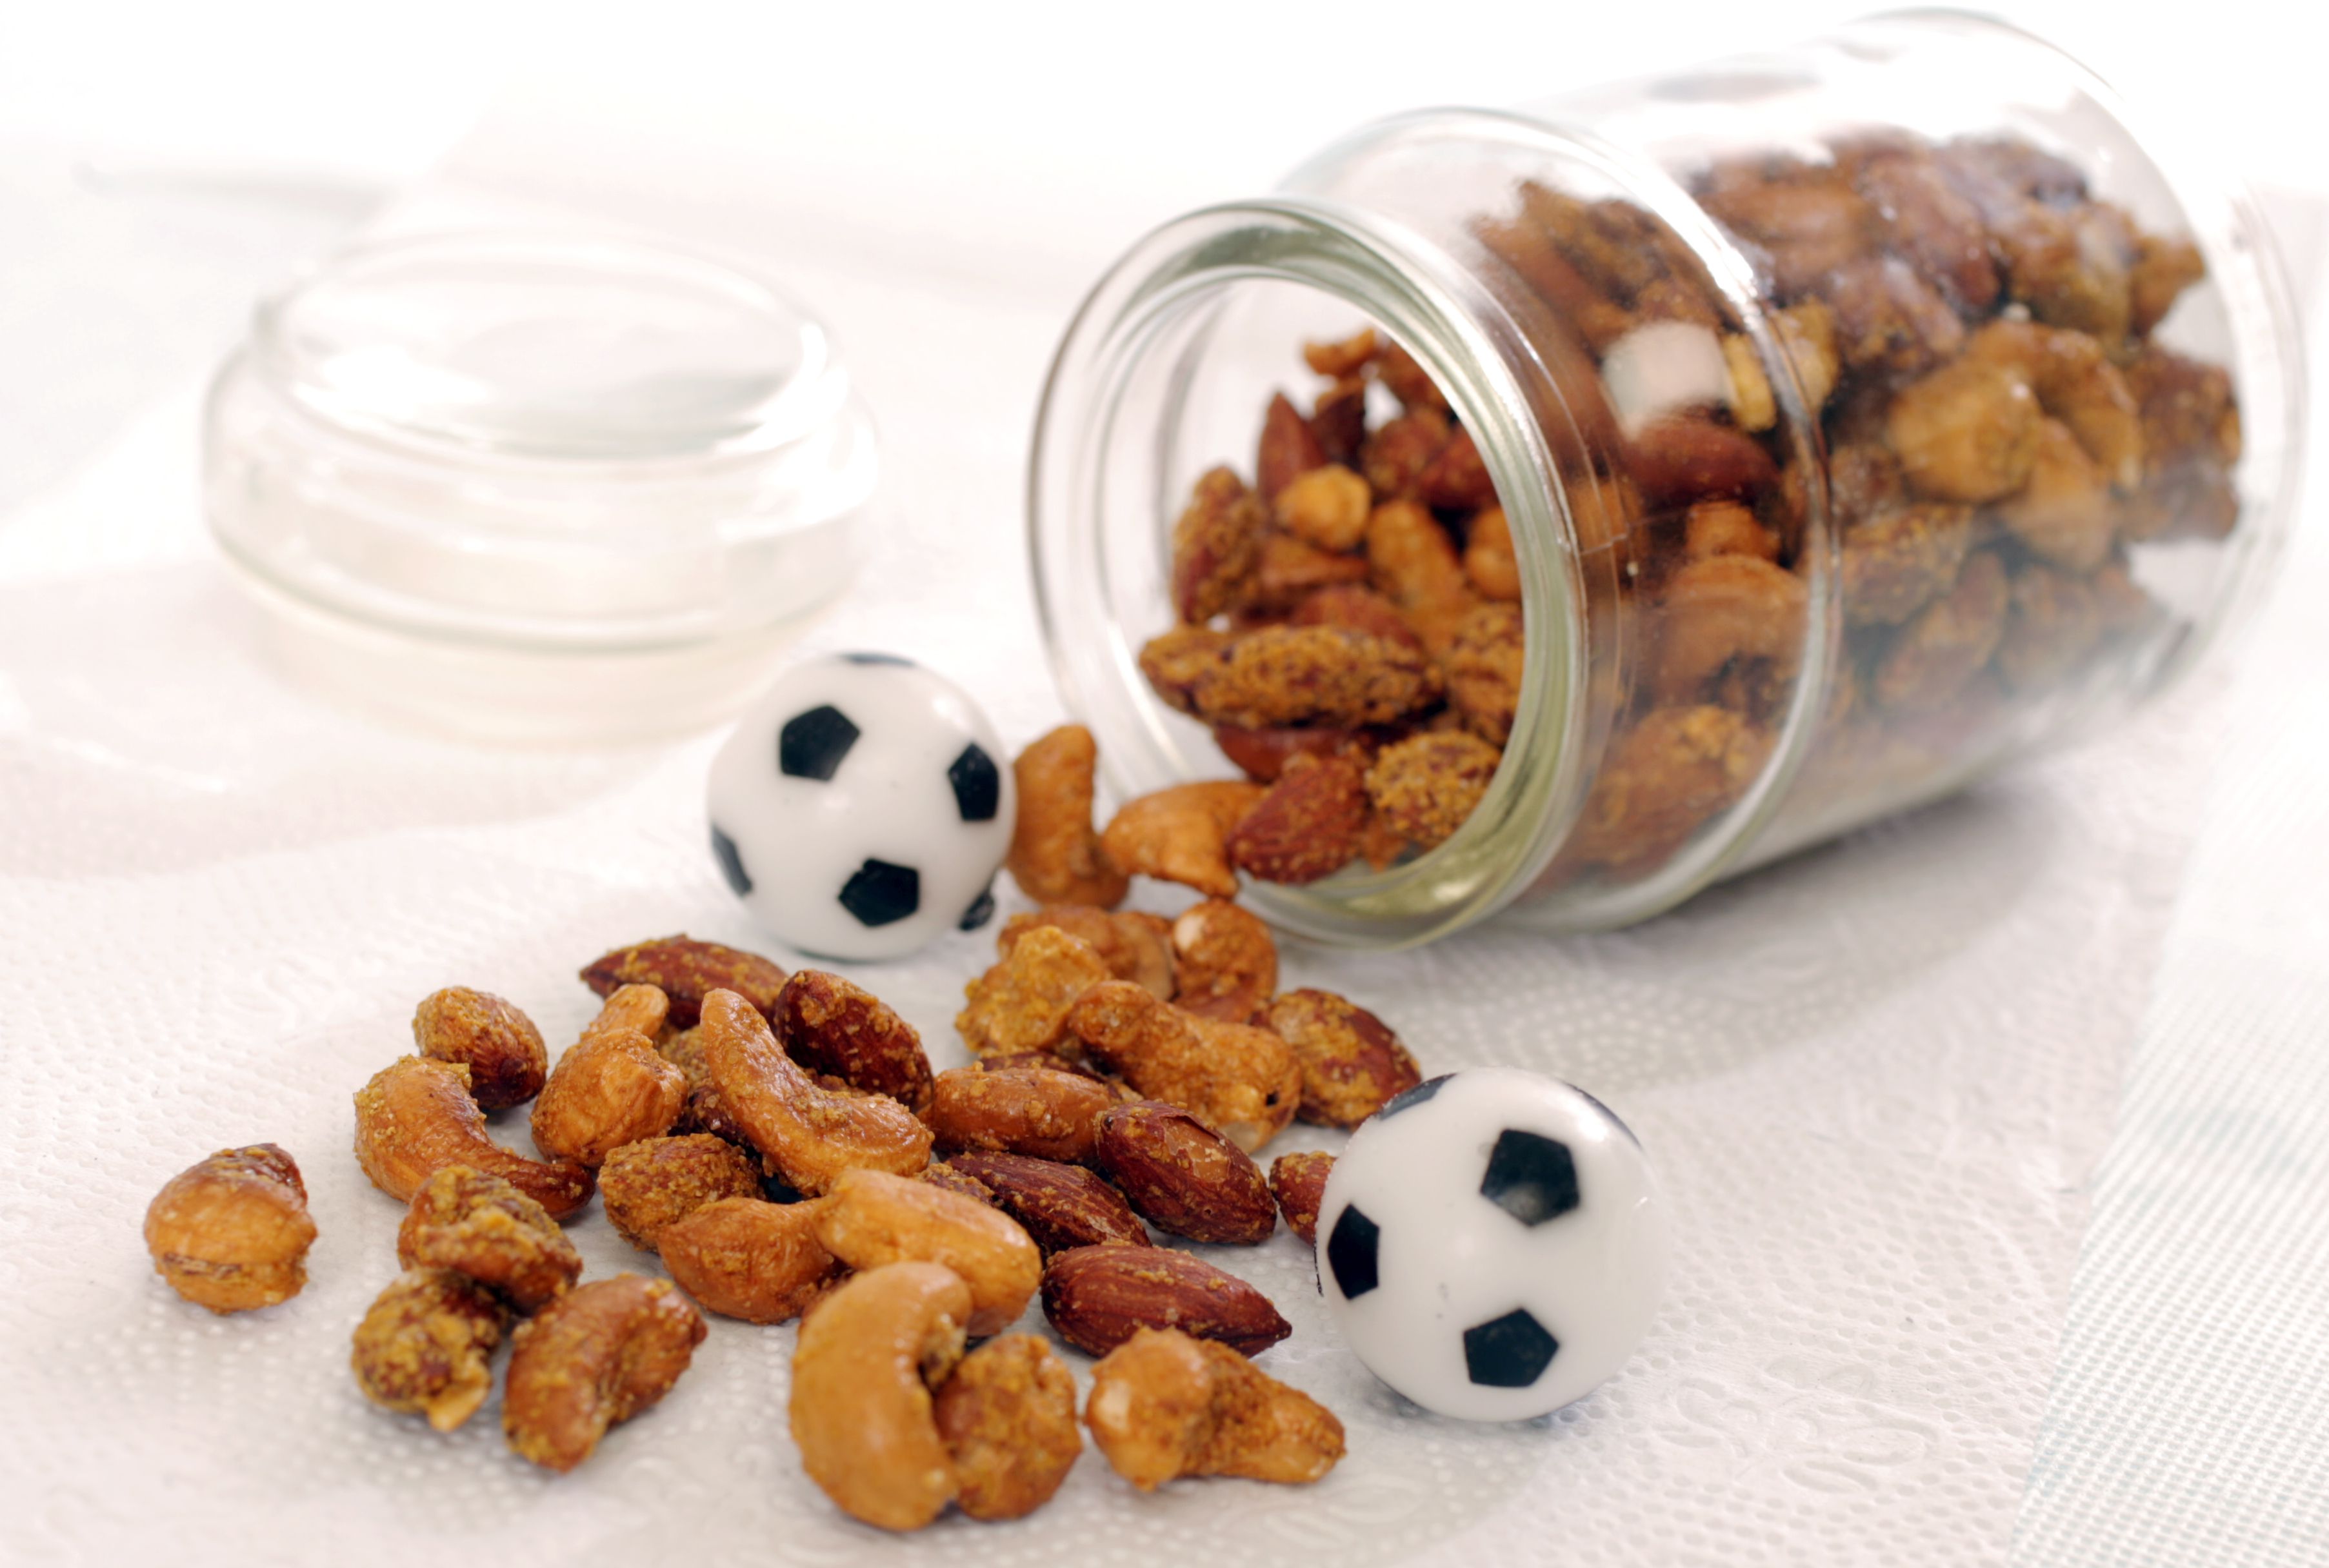 Spiced Almonds and Cashew Nuts